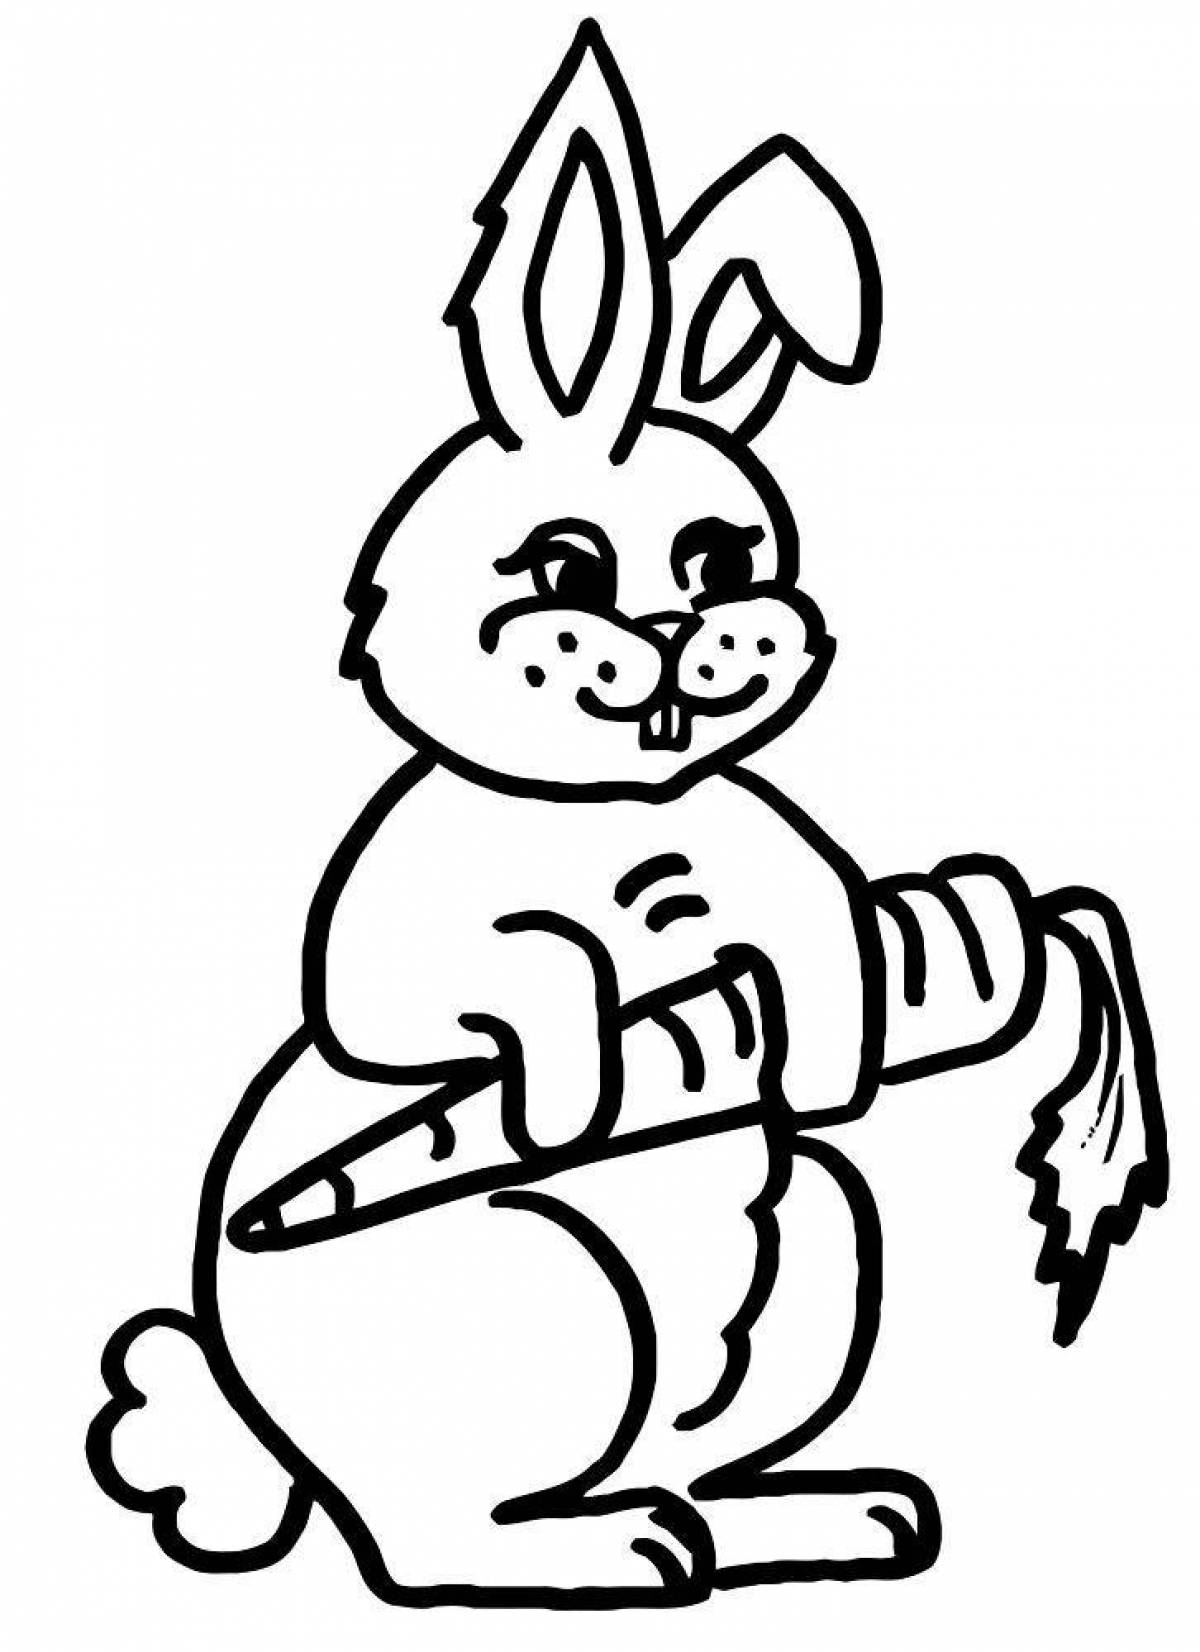 Coloring page wild rabbit with carrots